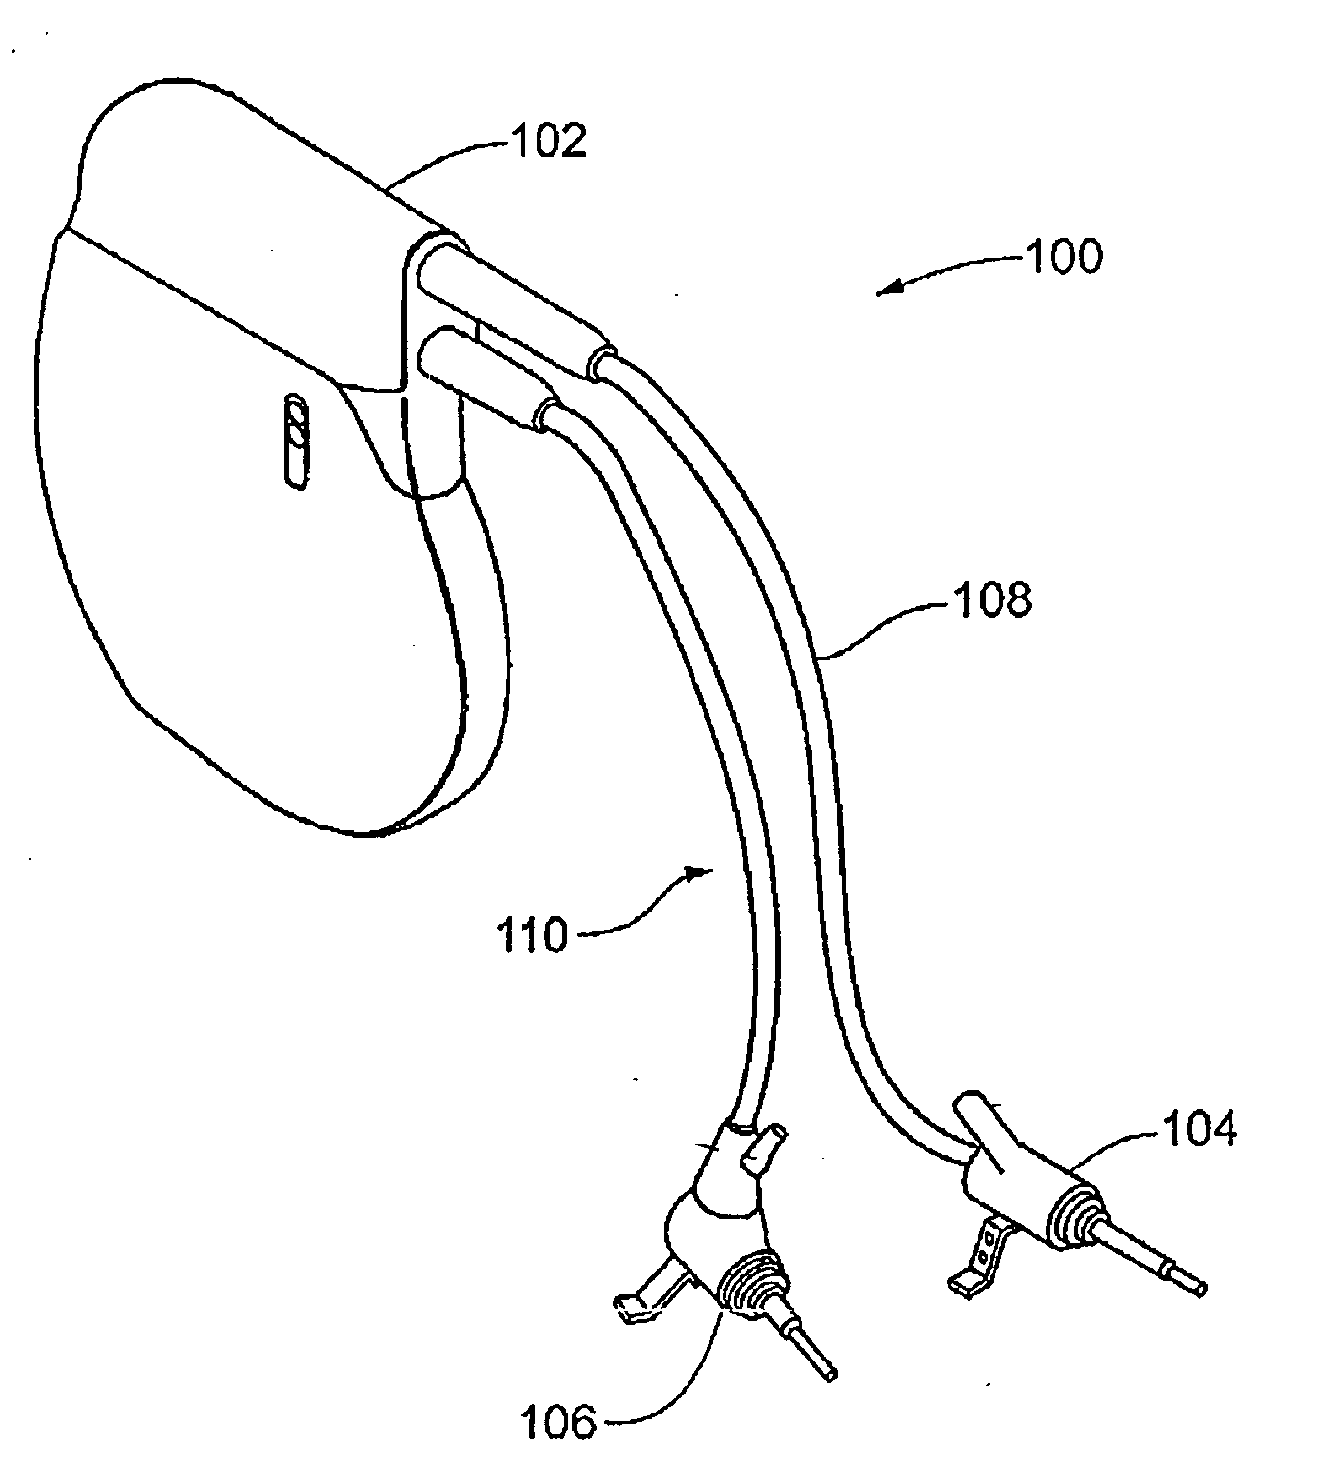 Method and apparatus for vibrational damping of implantable hearing aid components